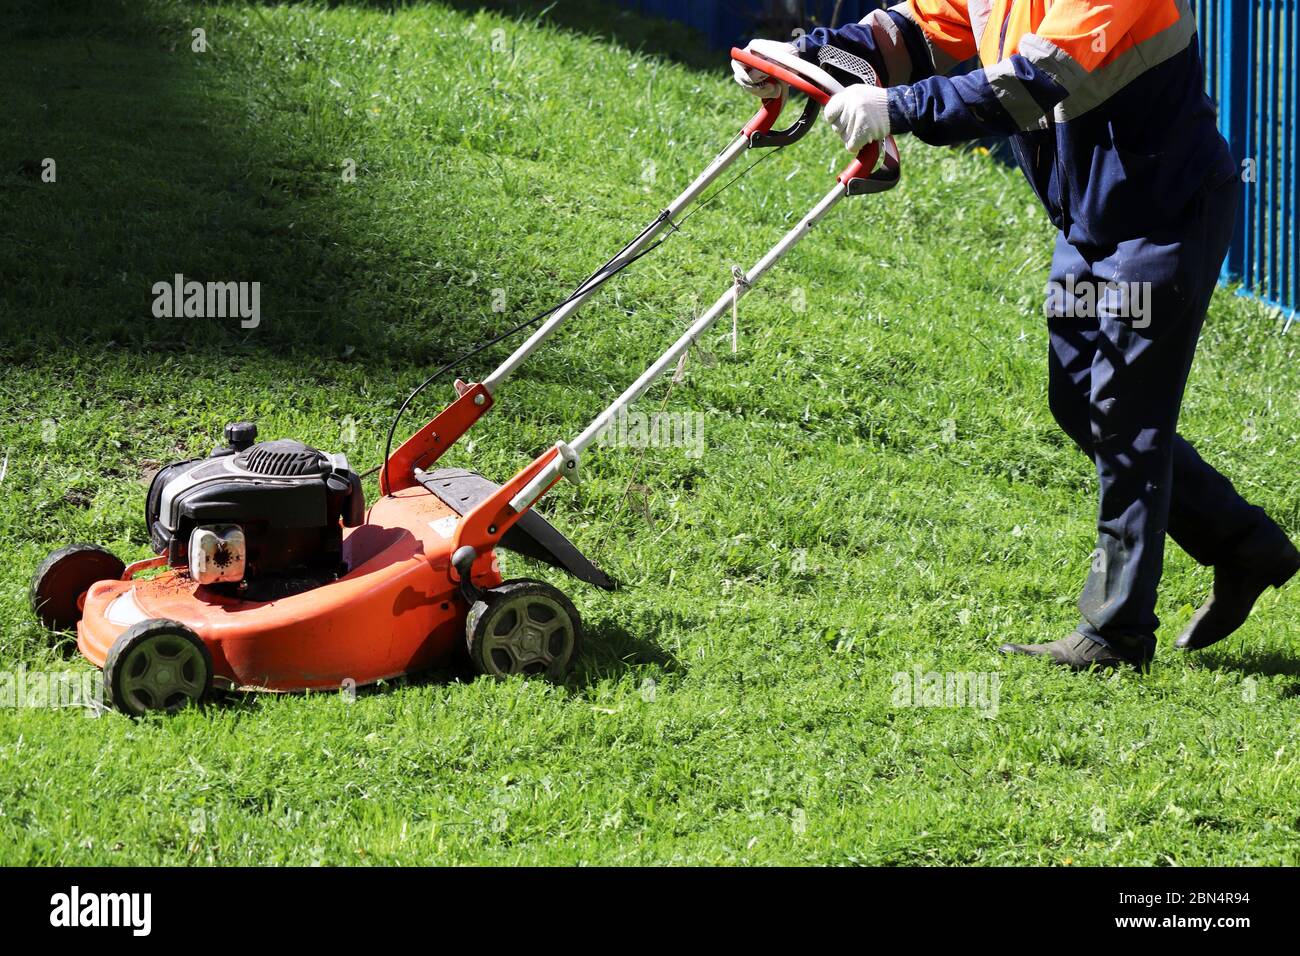 Gardener mowing the grass with lawn mower. Park improvement in sunny day Stock Photo